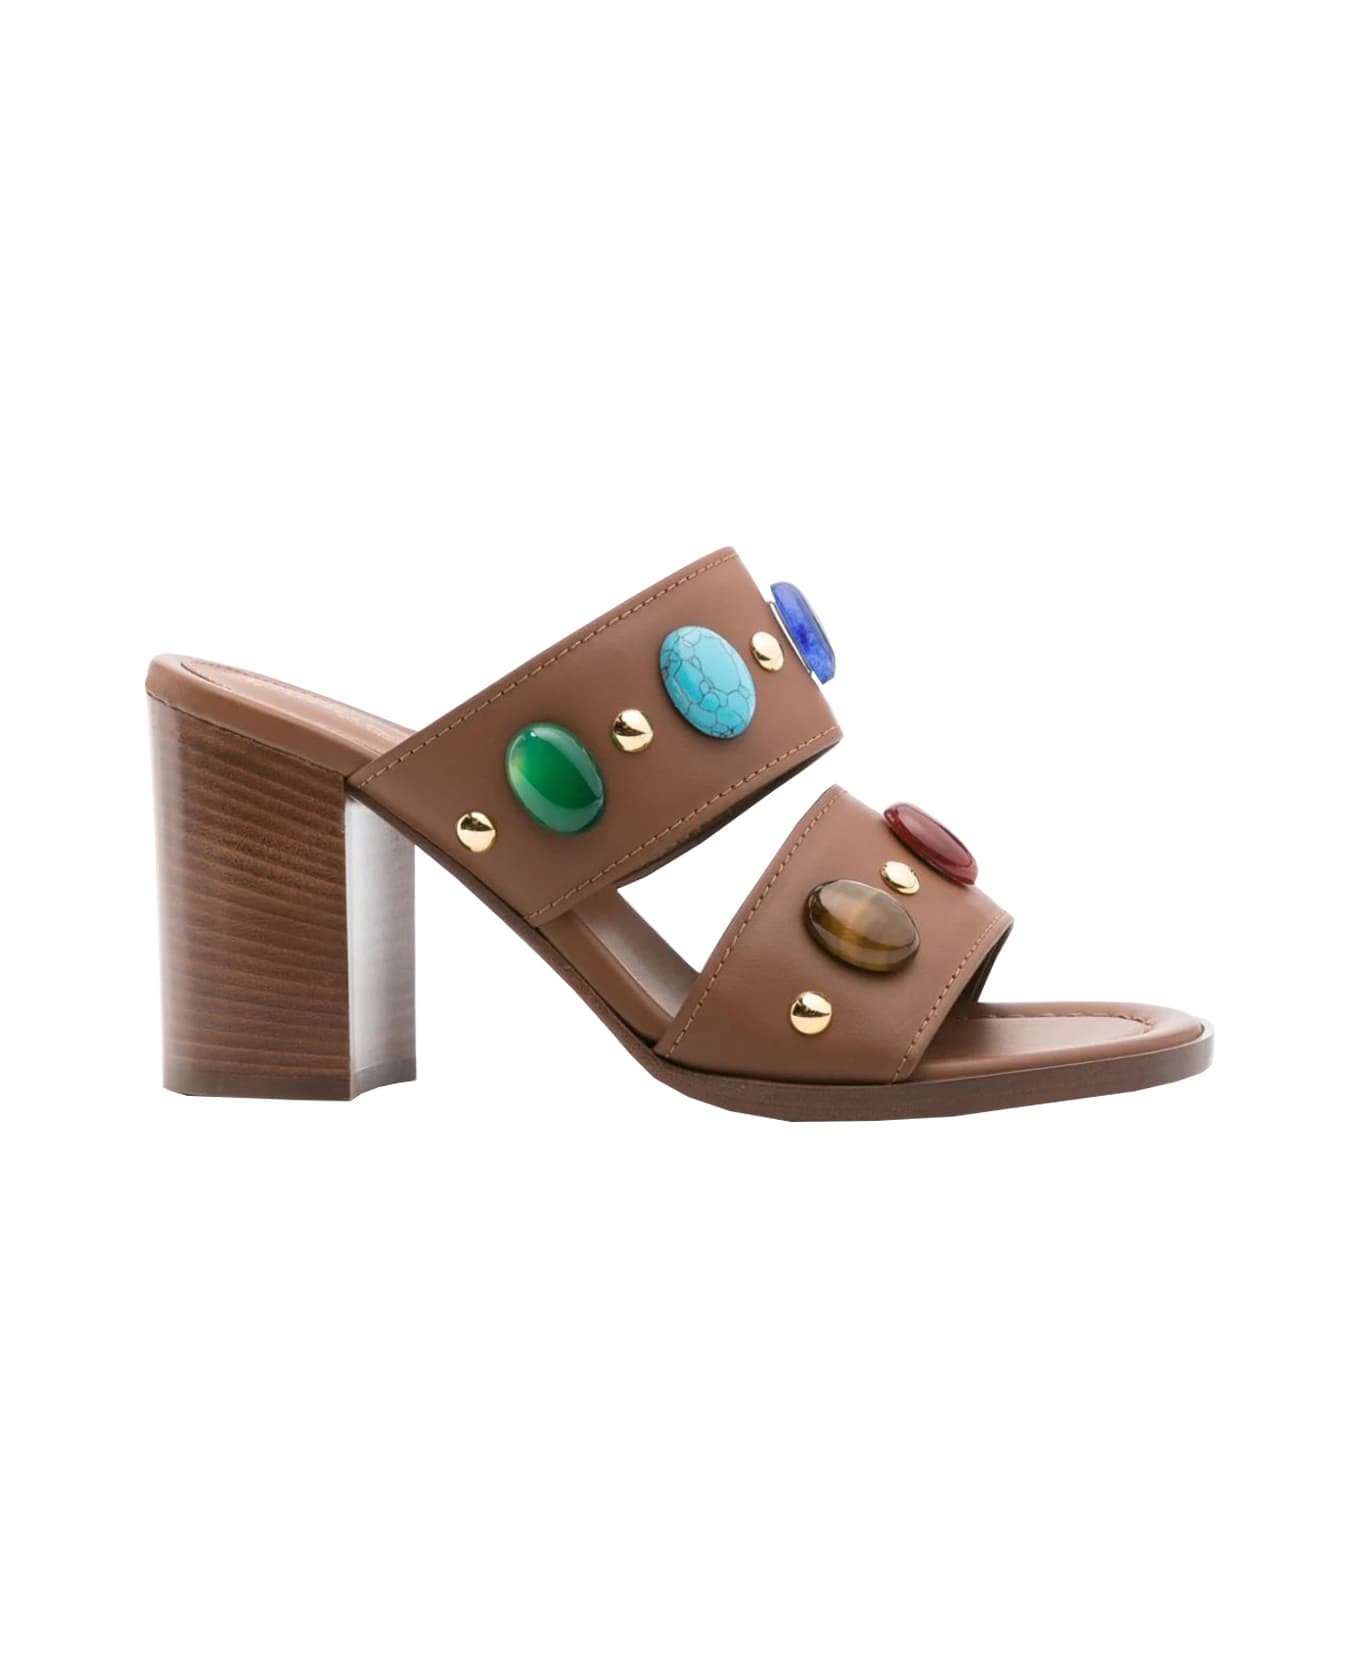 Gianvito Rossi Shoes With Heel - Brown サンダル